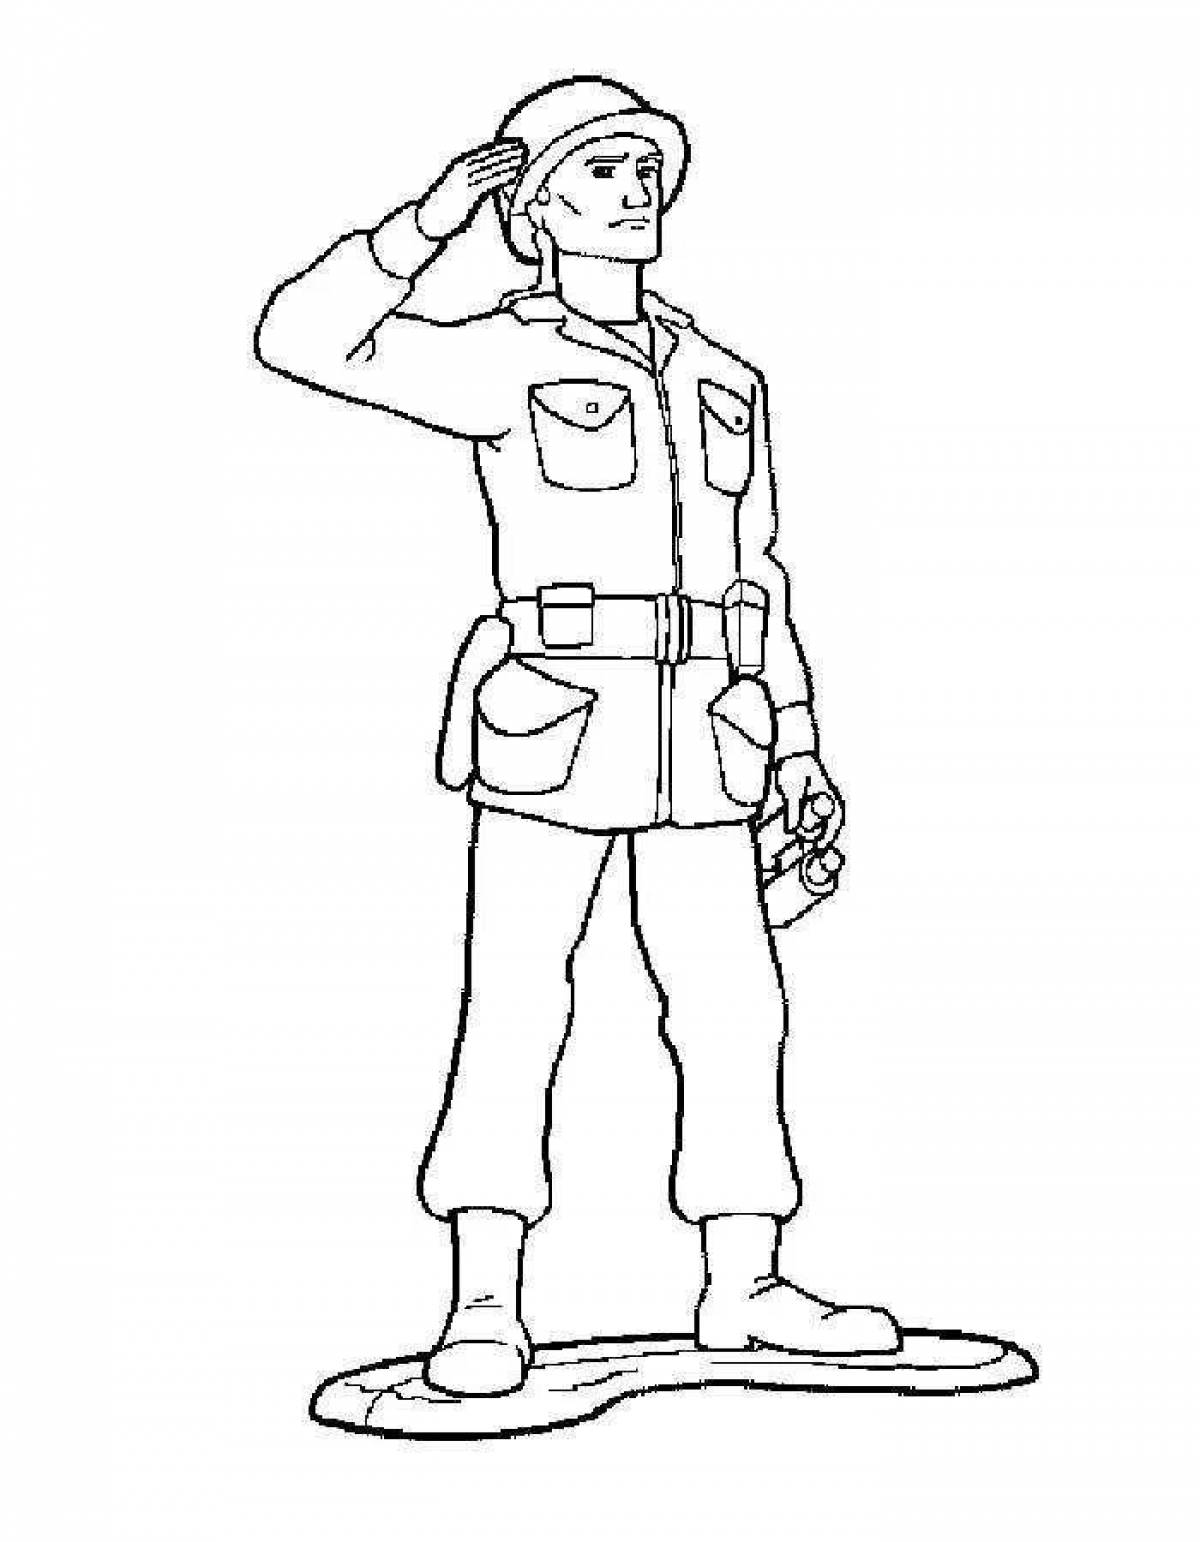 Soldier drawing #9